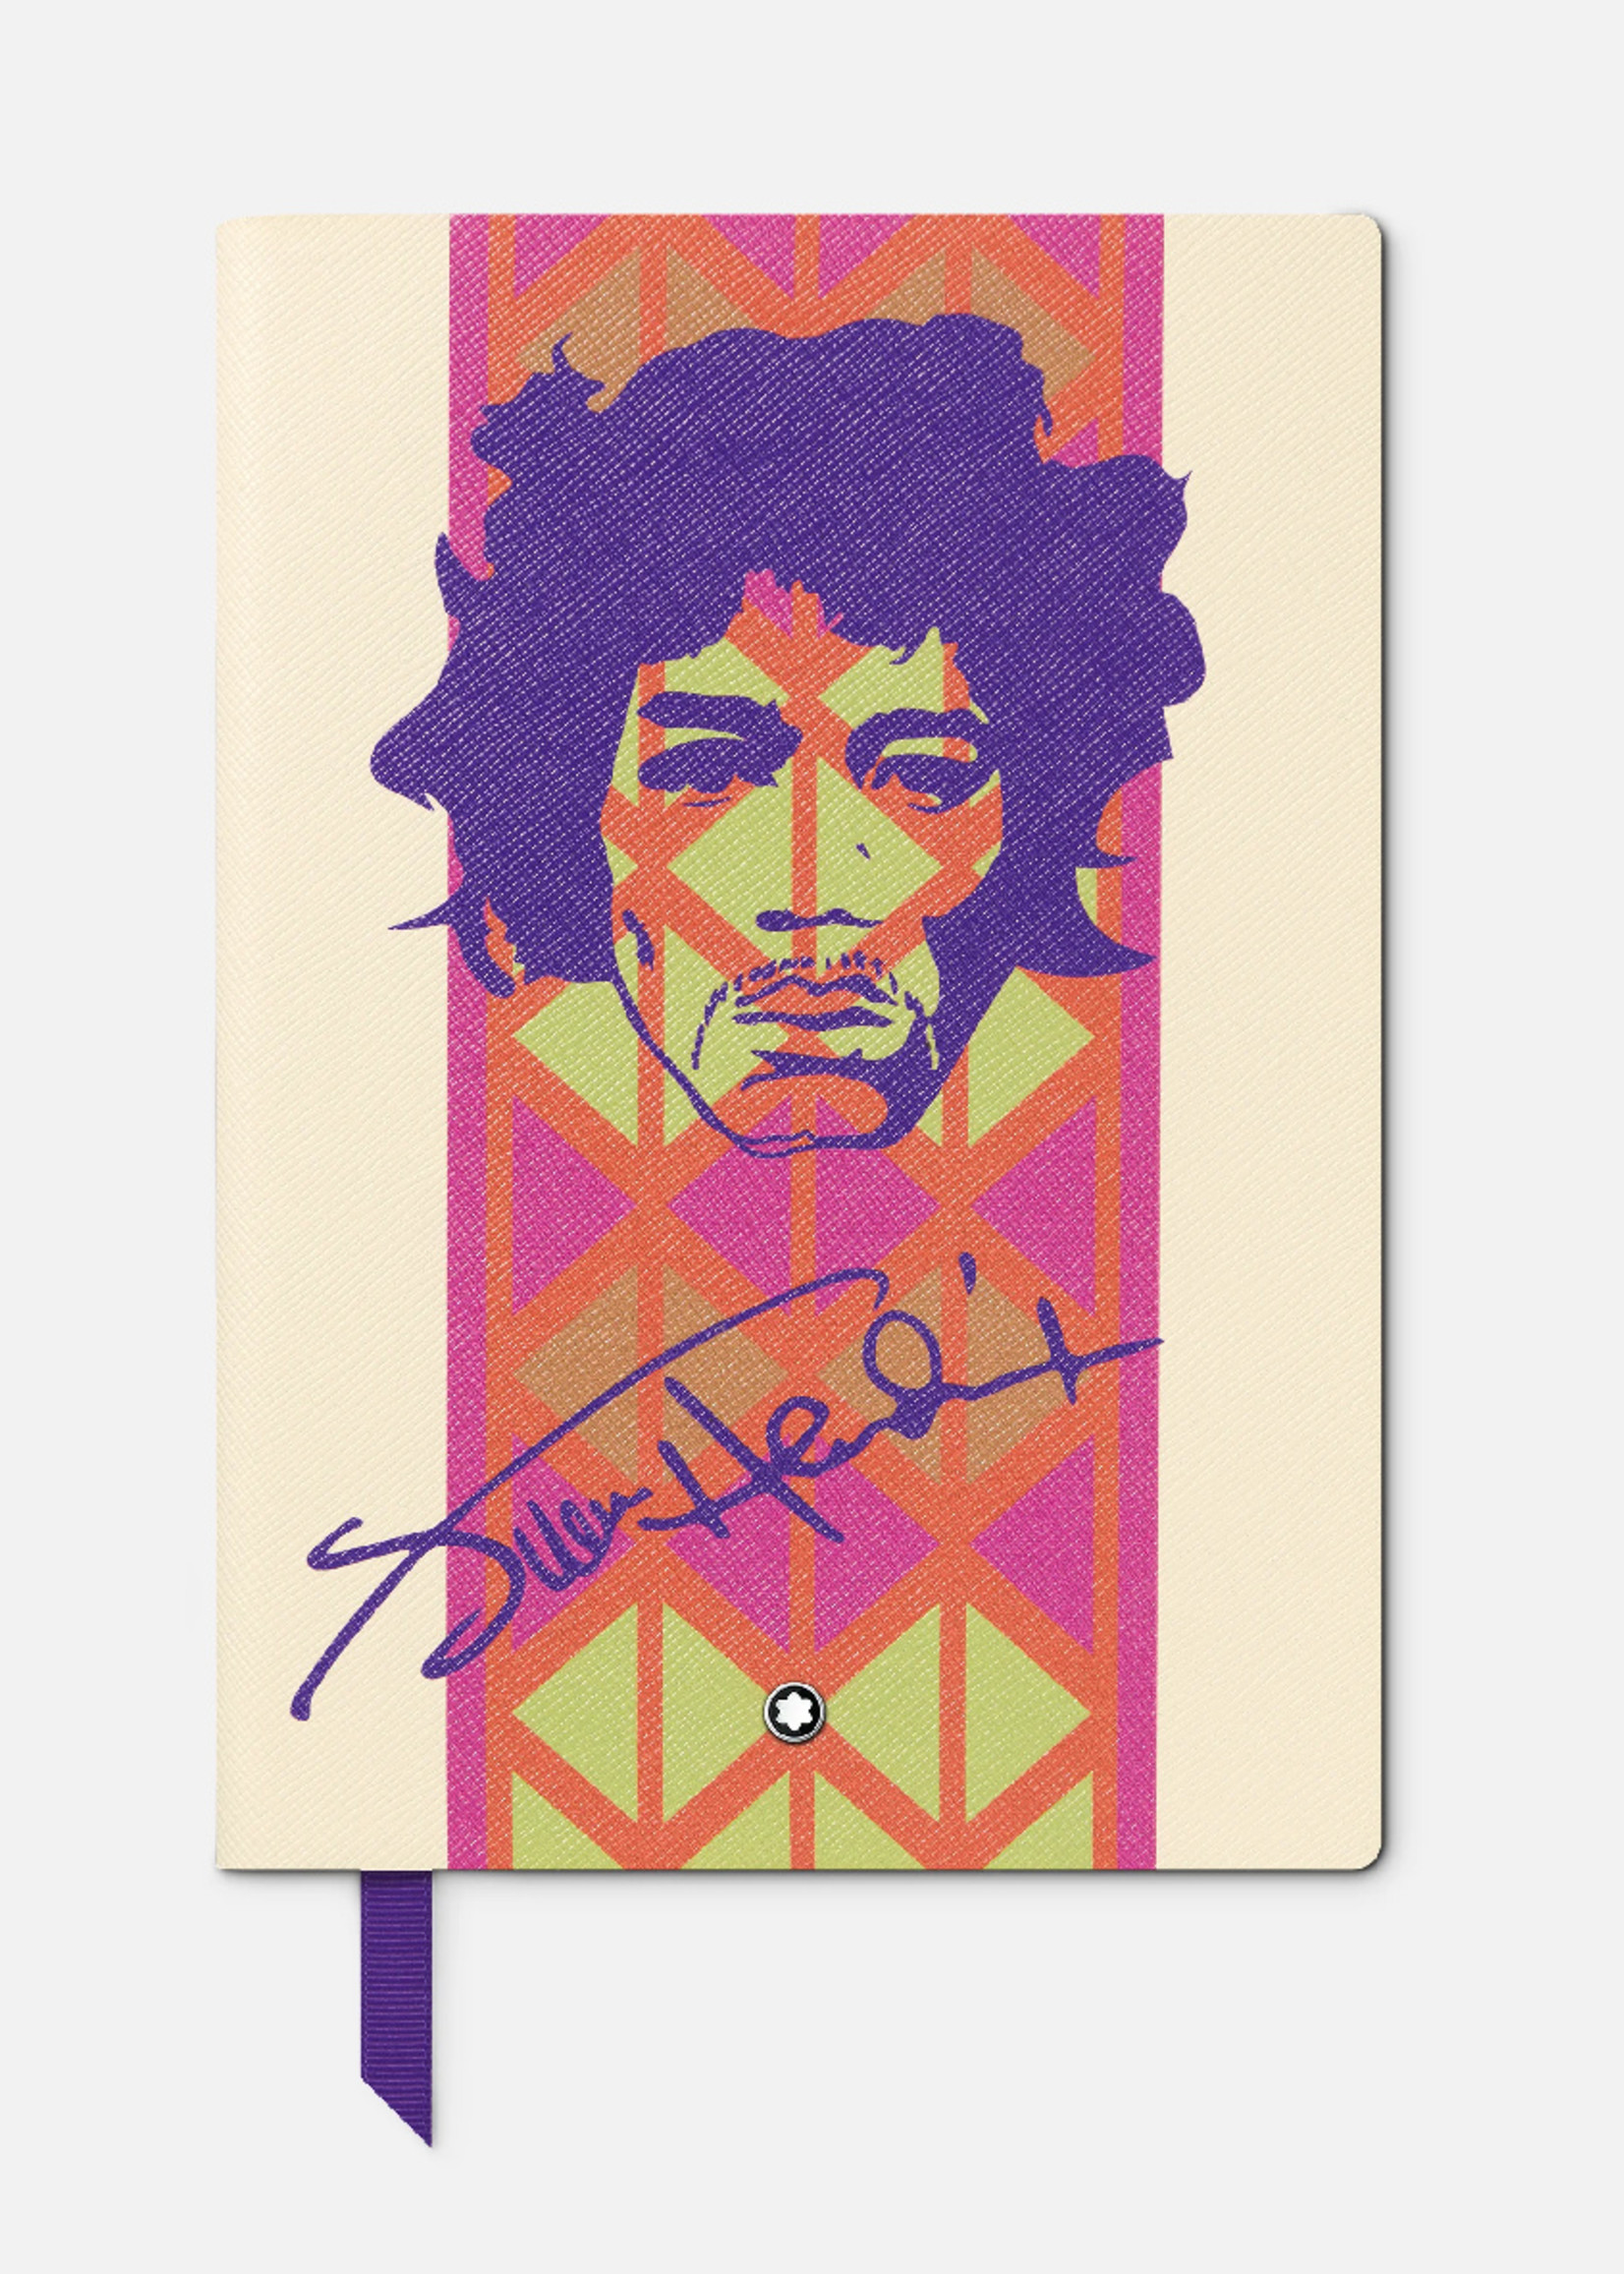 MONTBLANC Notebook #146 lined Great Characters Jimi Hendrix